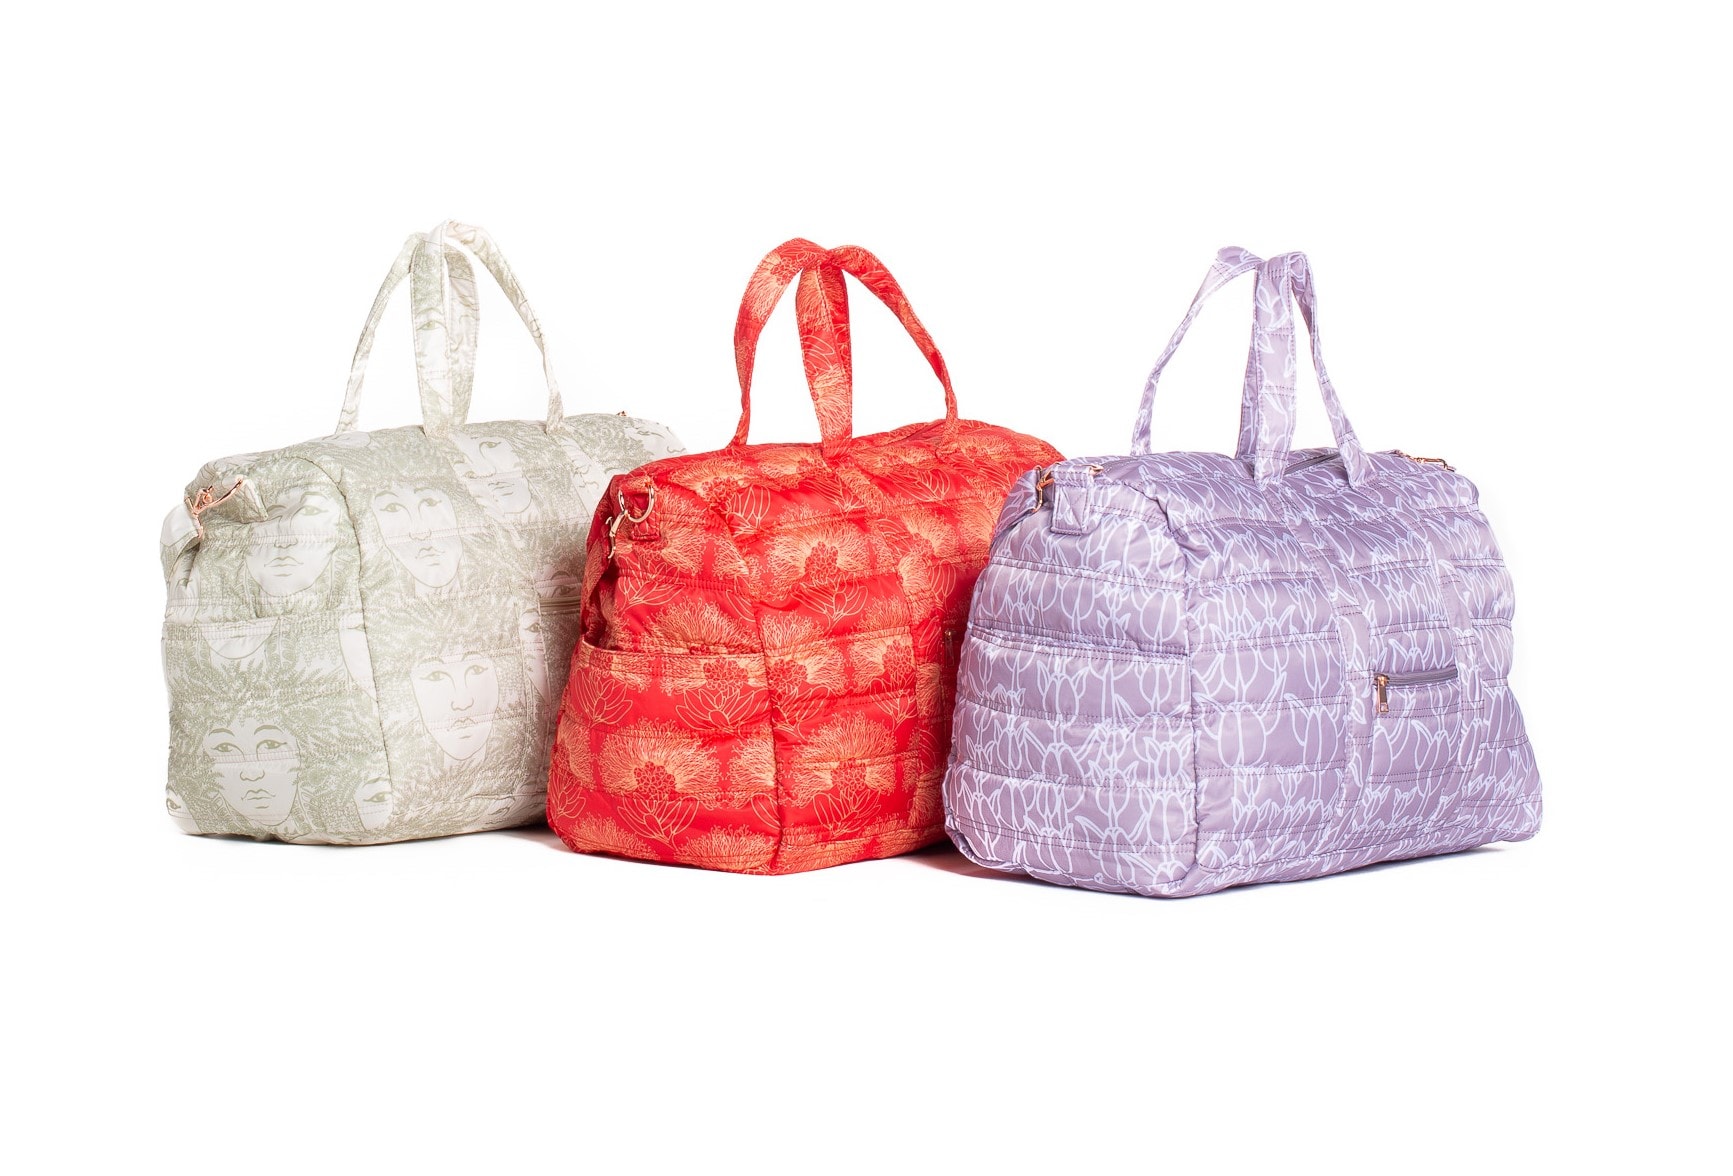 Laulea Bags Trio - Red, Green, and Purple